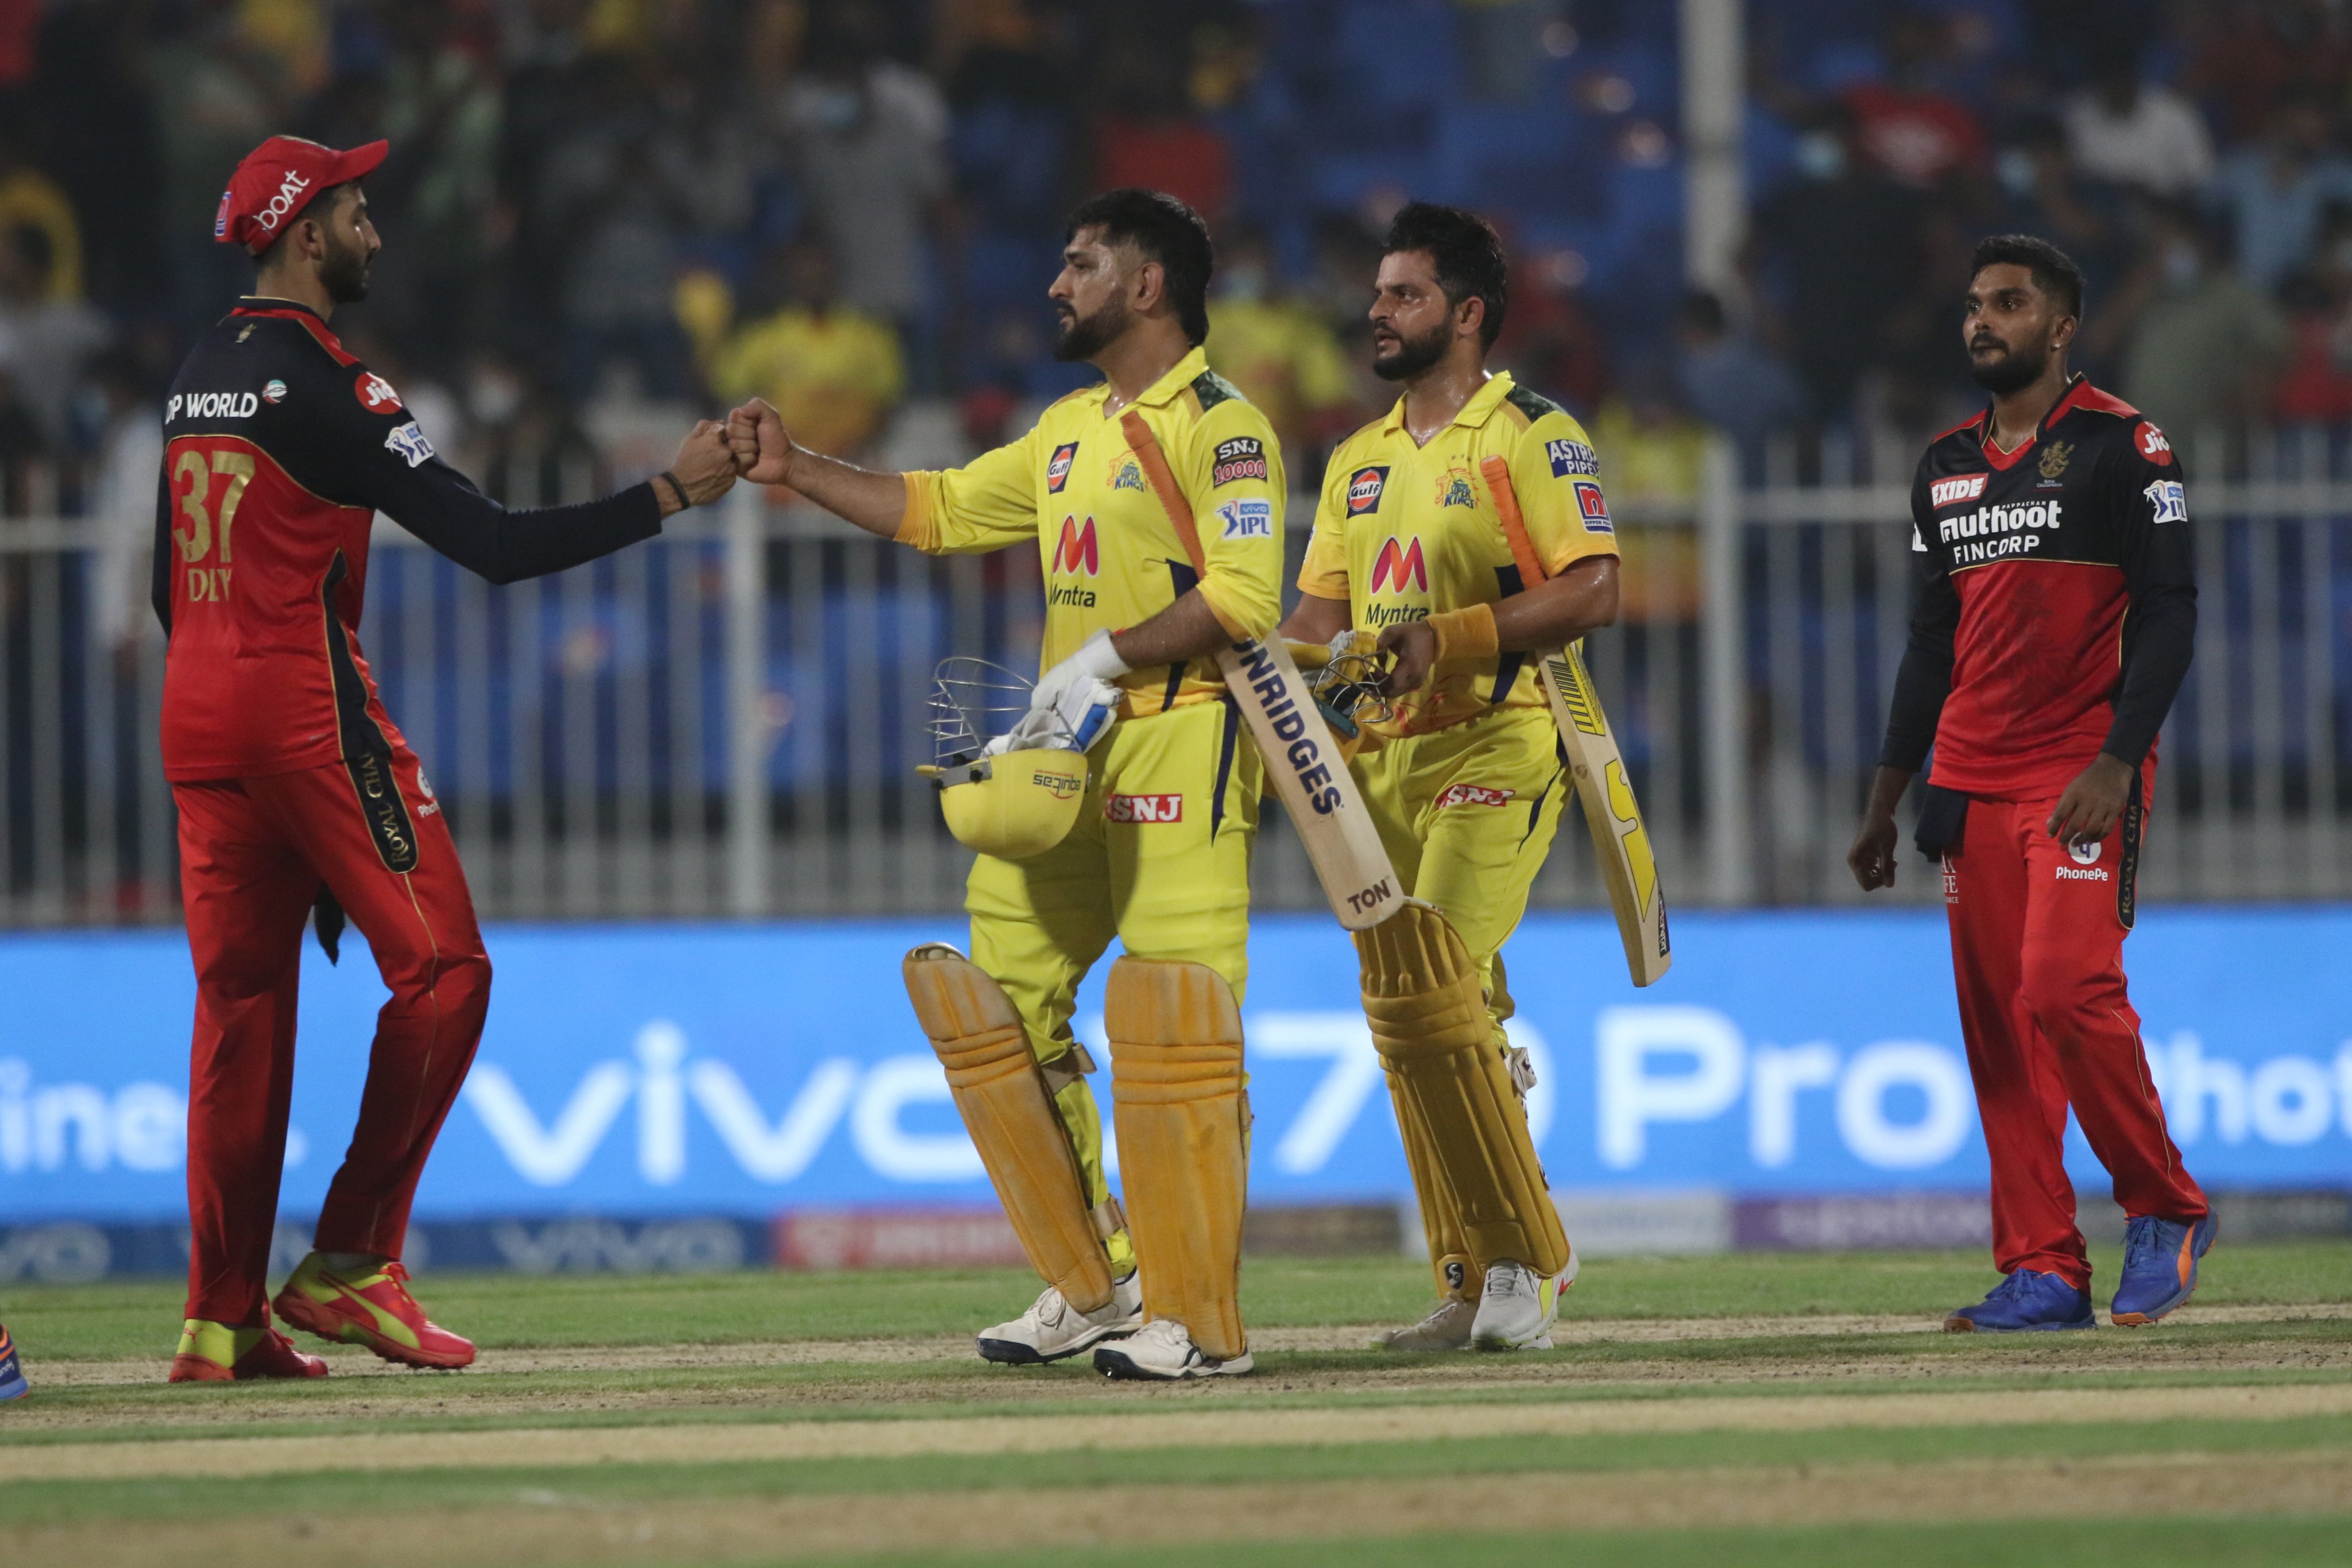 CSK vs RCB | Always have fights with 'brother' Dwayne Bravo over slower balls, reveals MS Dhoni 